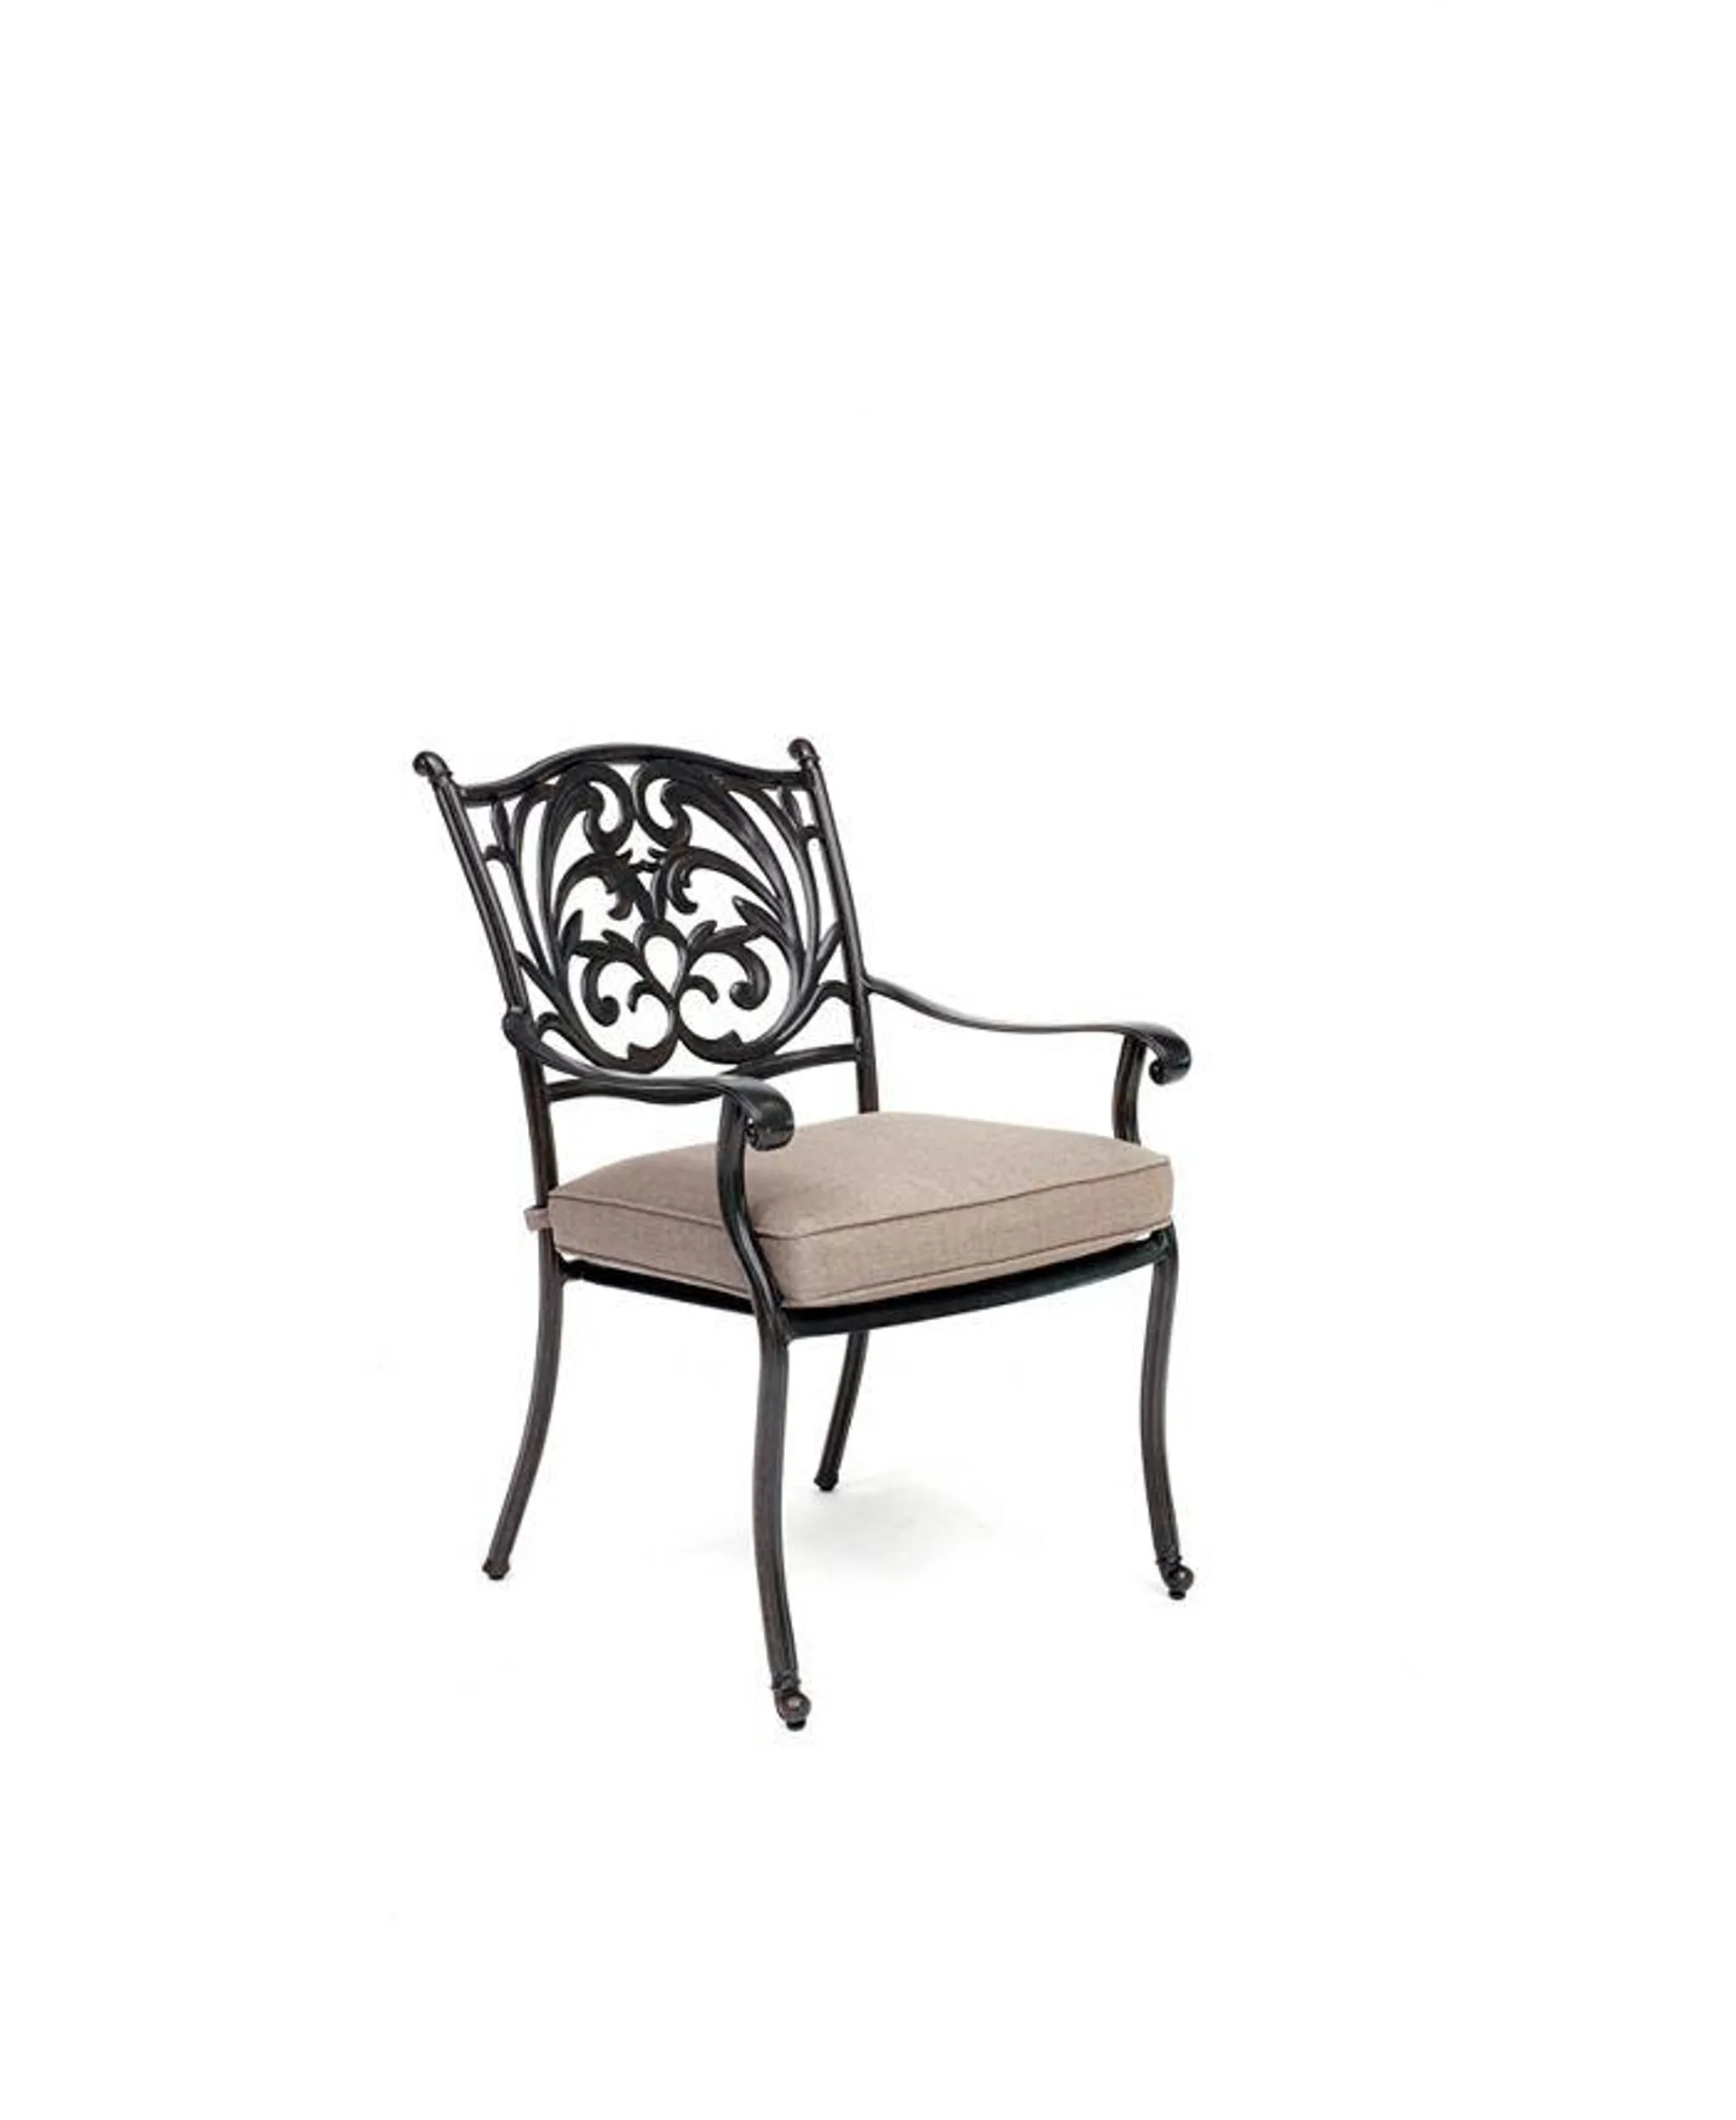 CLOSEOUT! Chateau Outdoor Dining Chair, with Outdura® Cushions, Created for Macy's